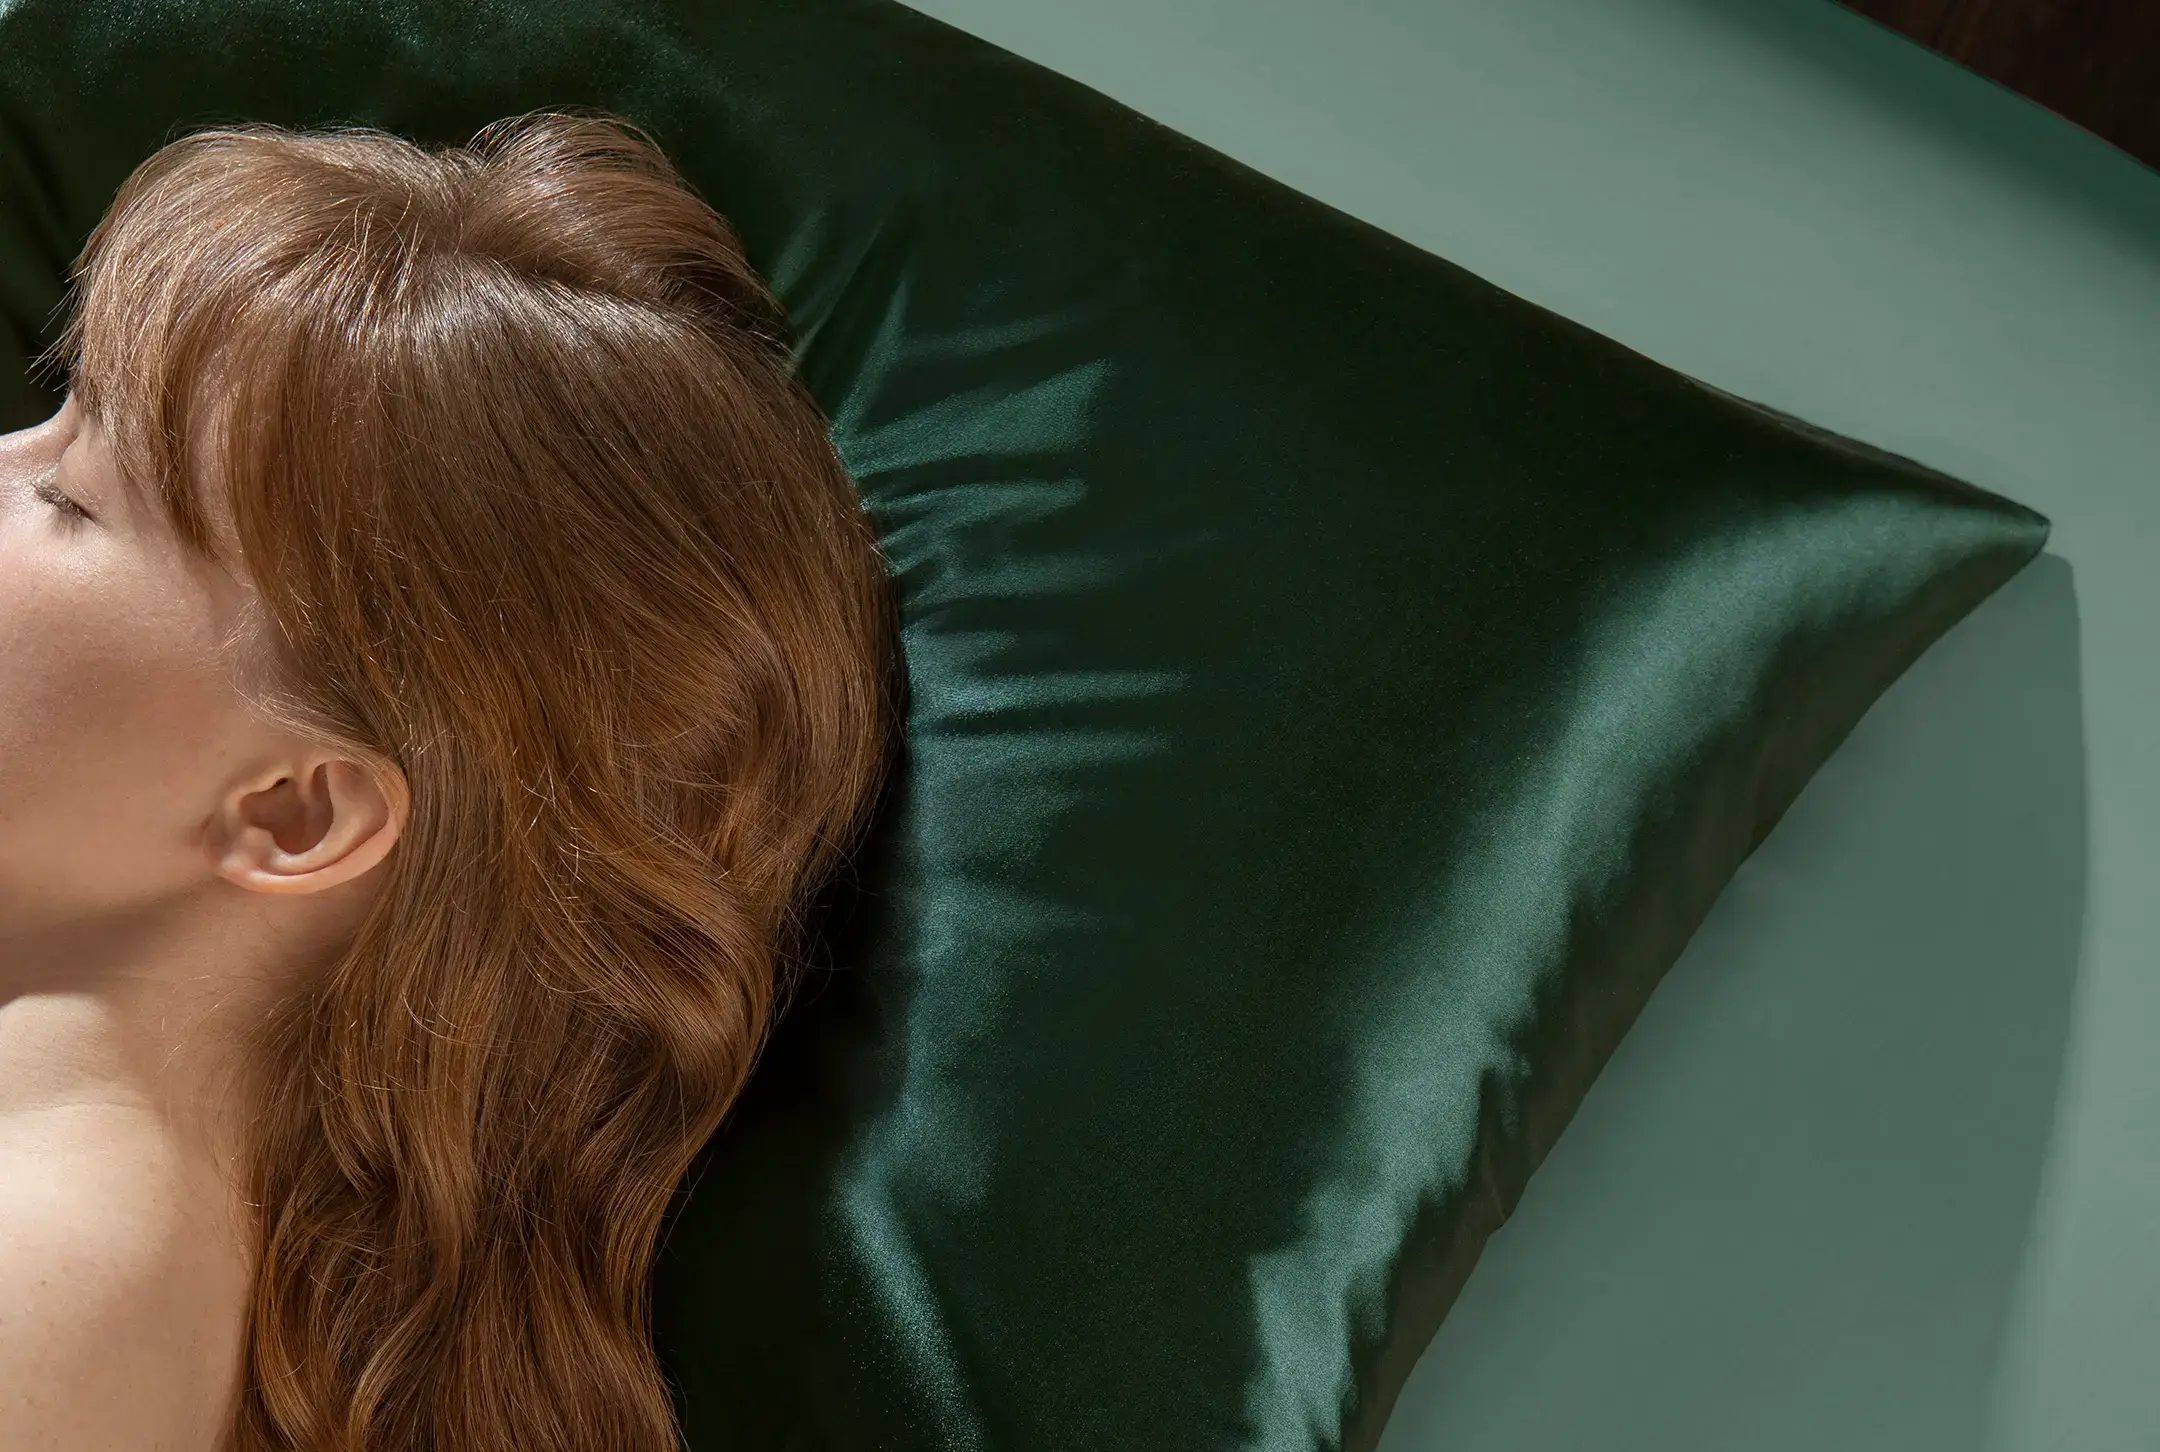 Woman resting on a green satin pillow, hair sprawled out.